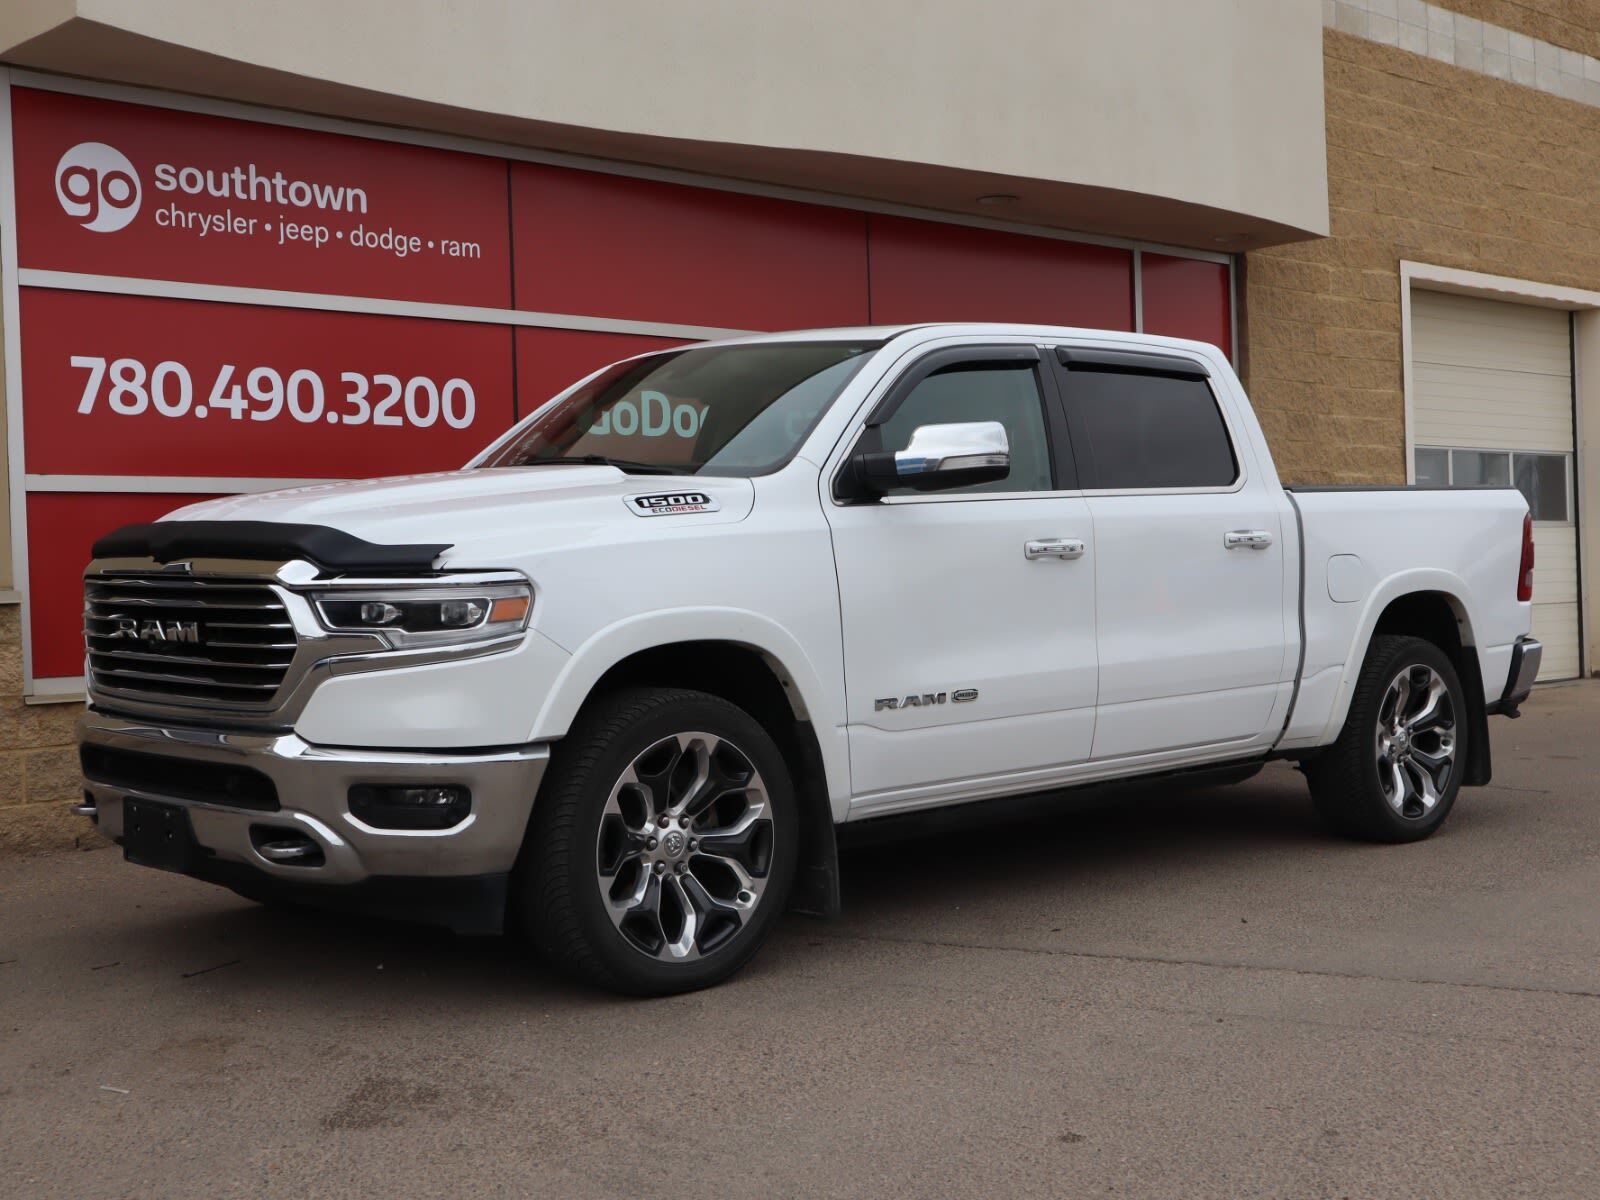 2020 Ram 1500 LONGHORN IN BRIGHT WHITE EQUIPPED WITH A 3.0L TURB